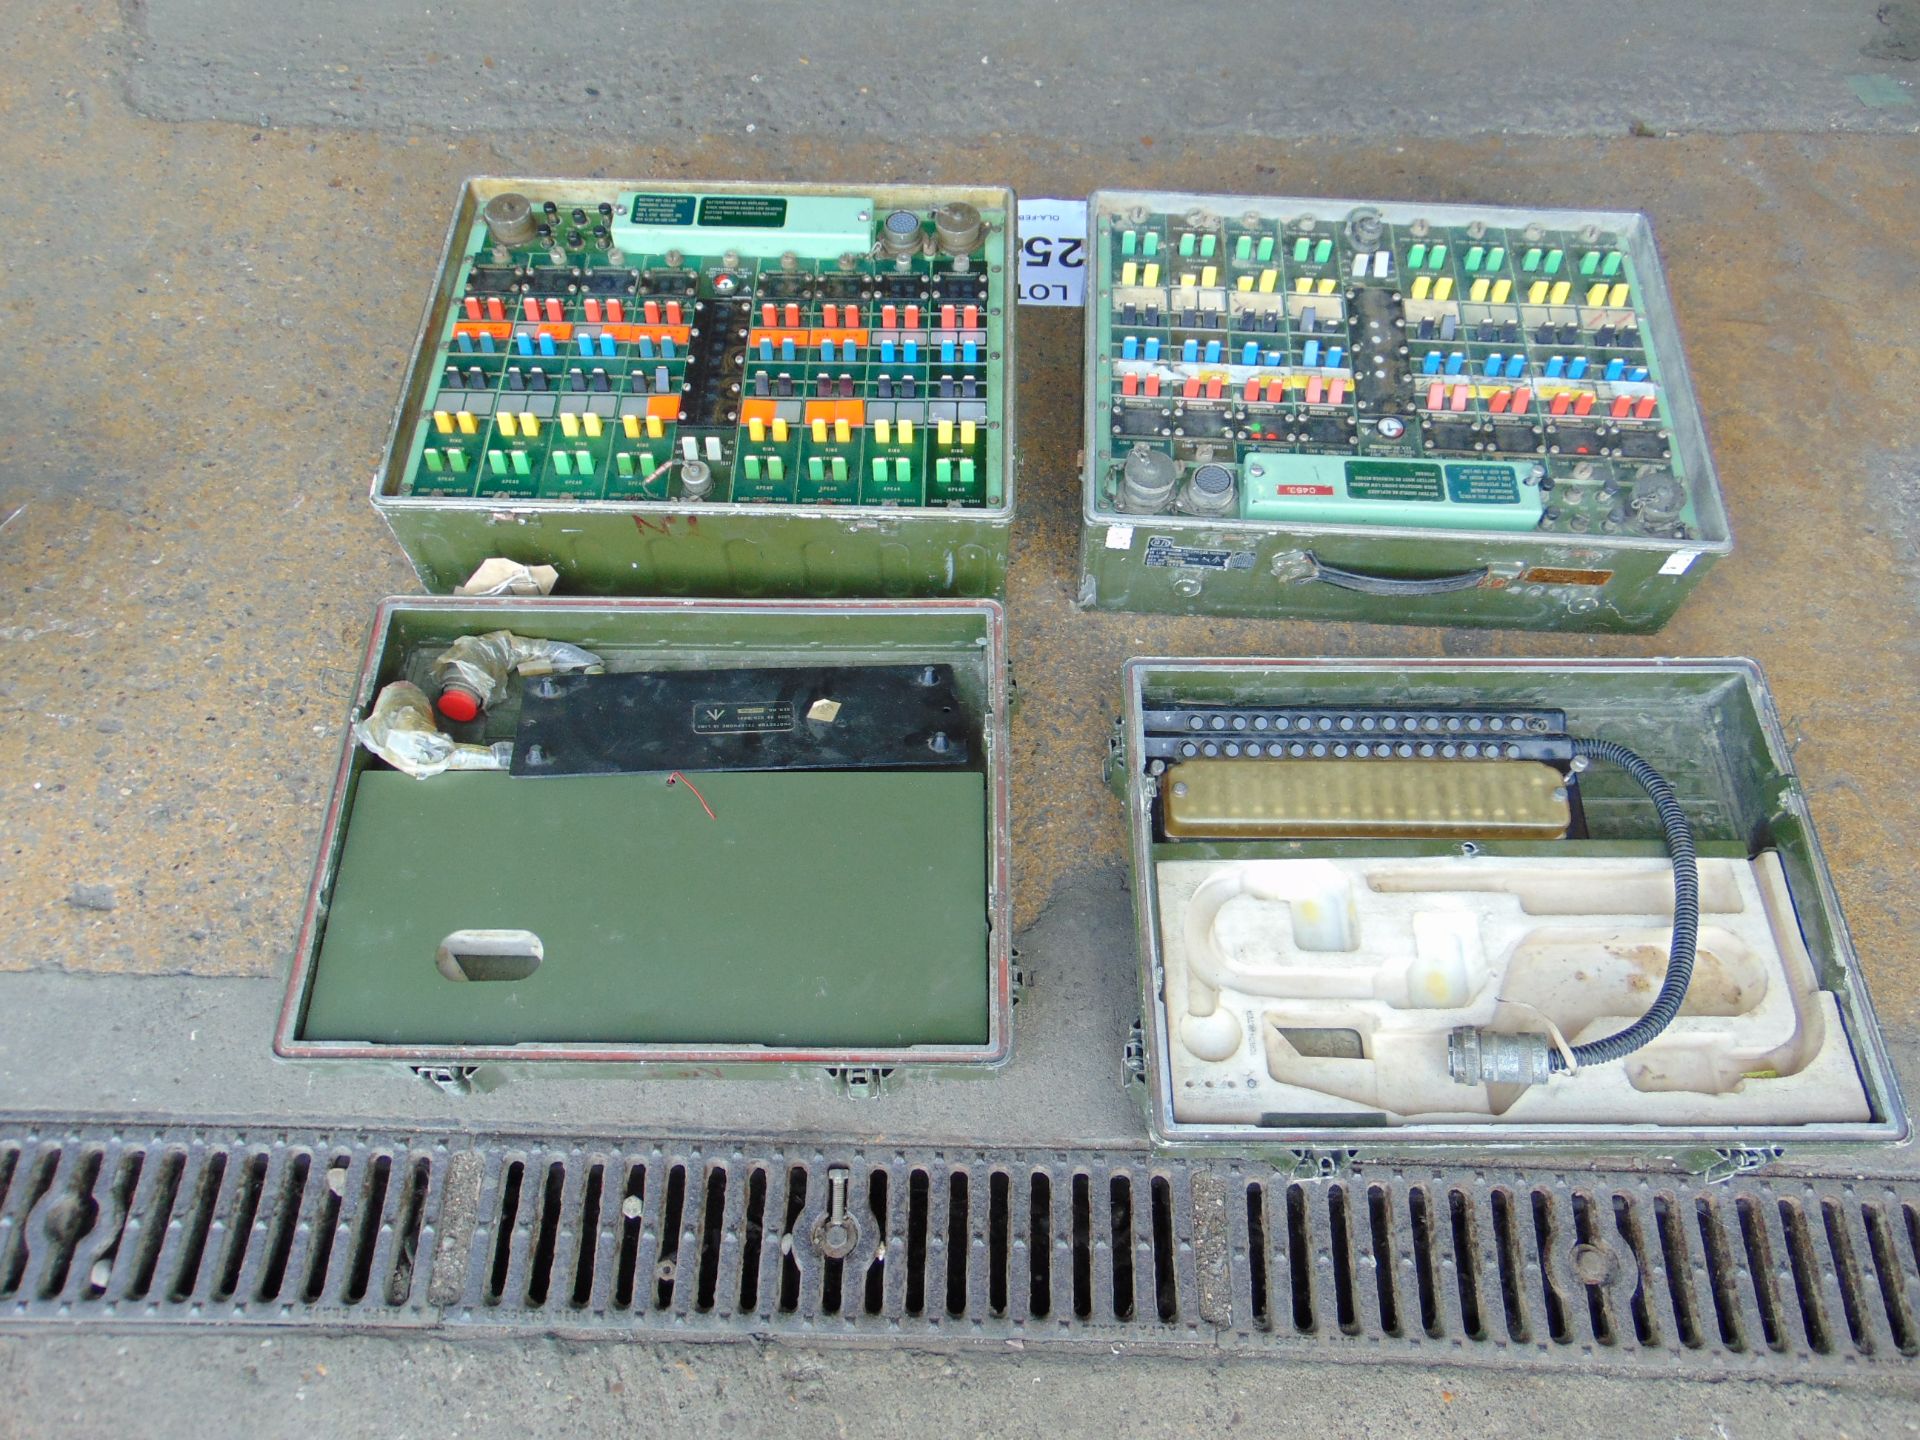 2x Switch Board 18 Line Magneto in Case - Image 3 of 5